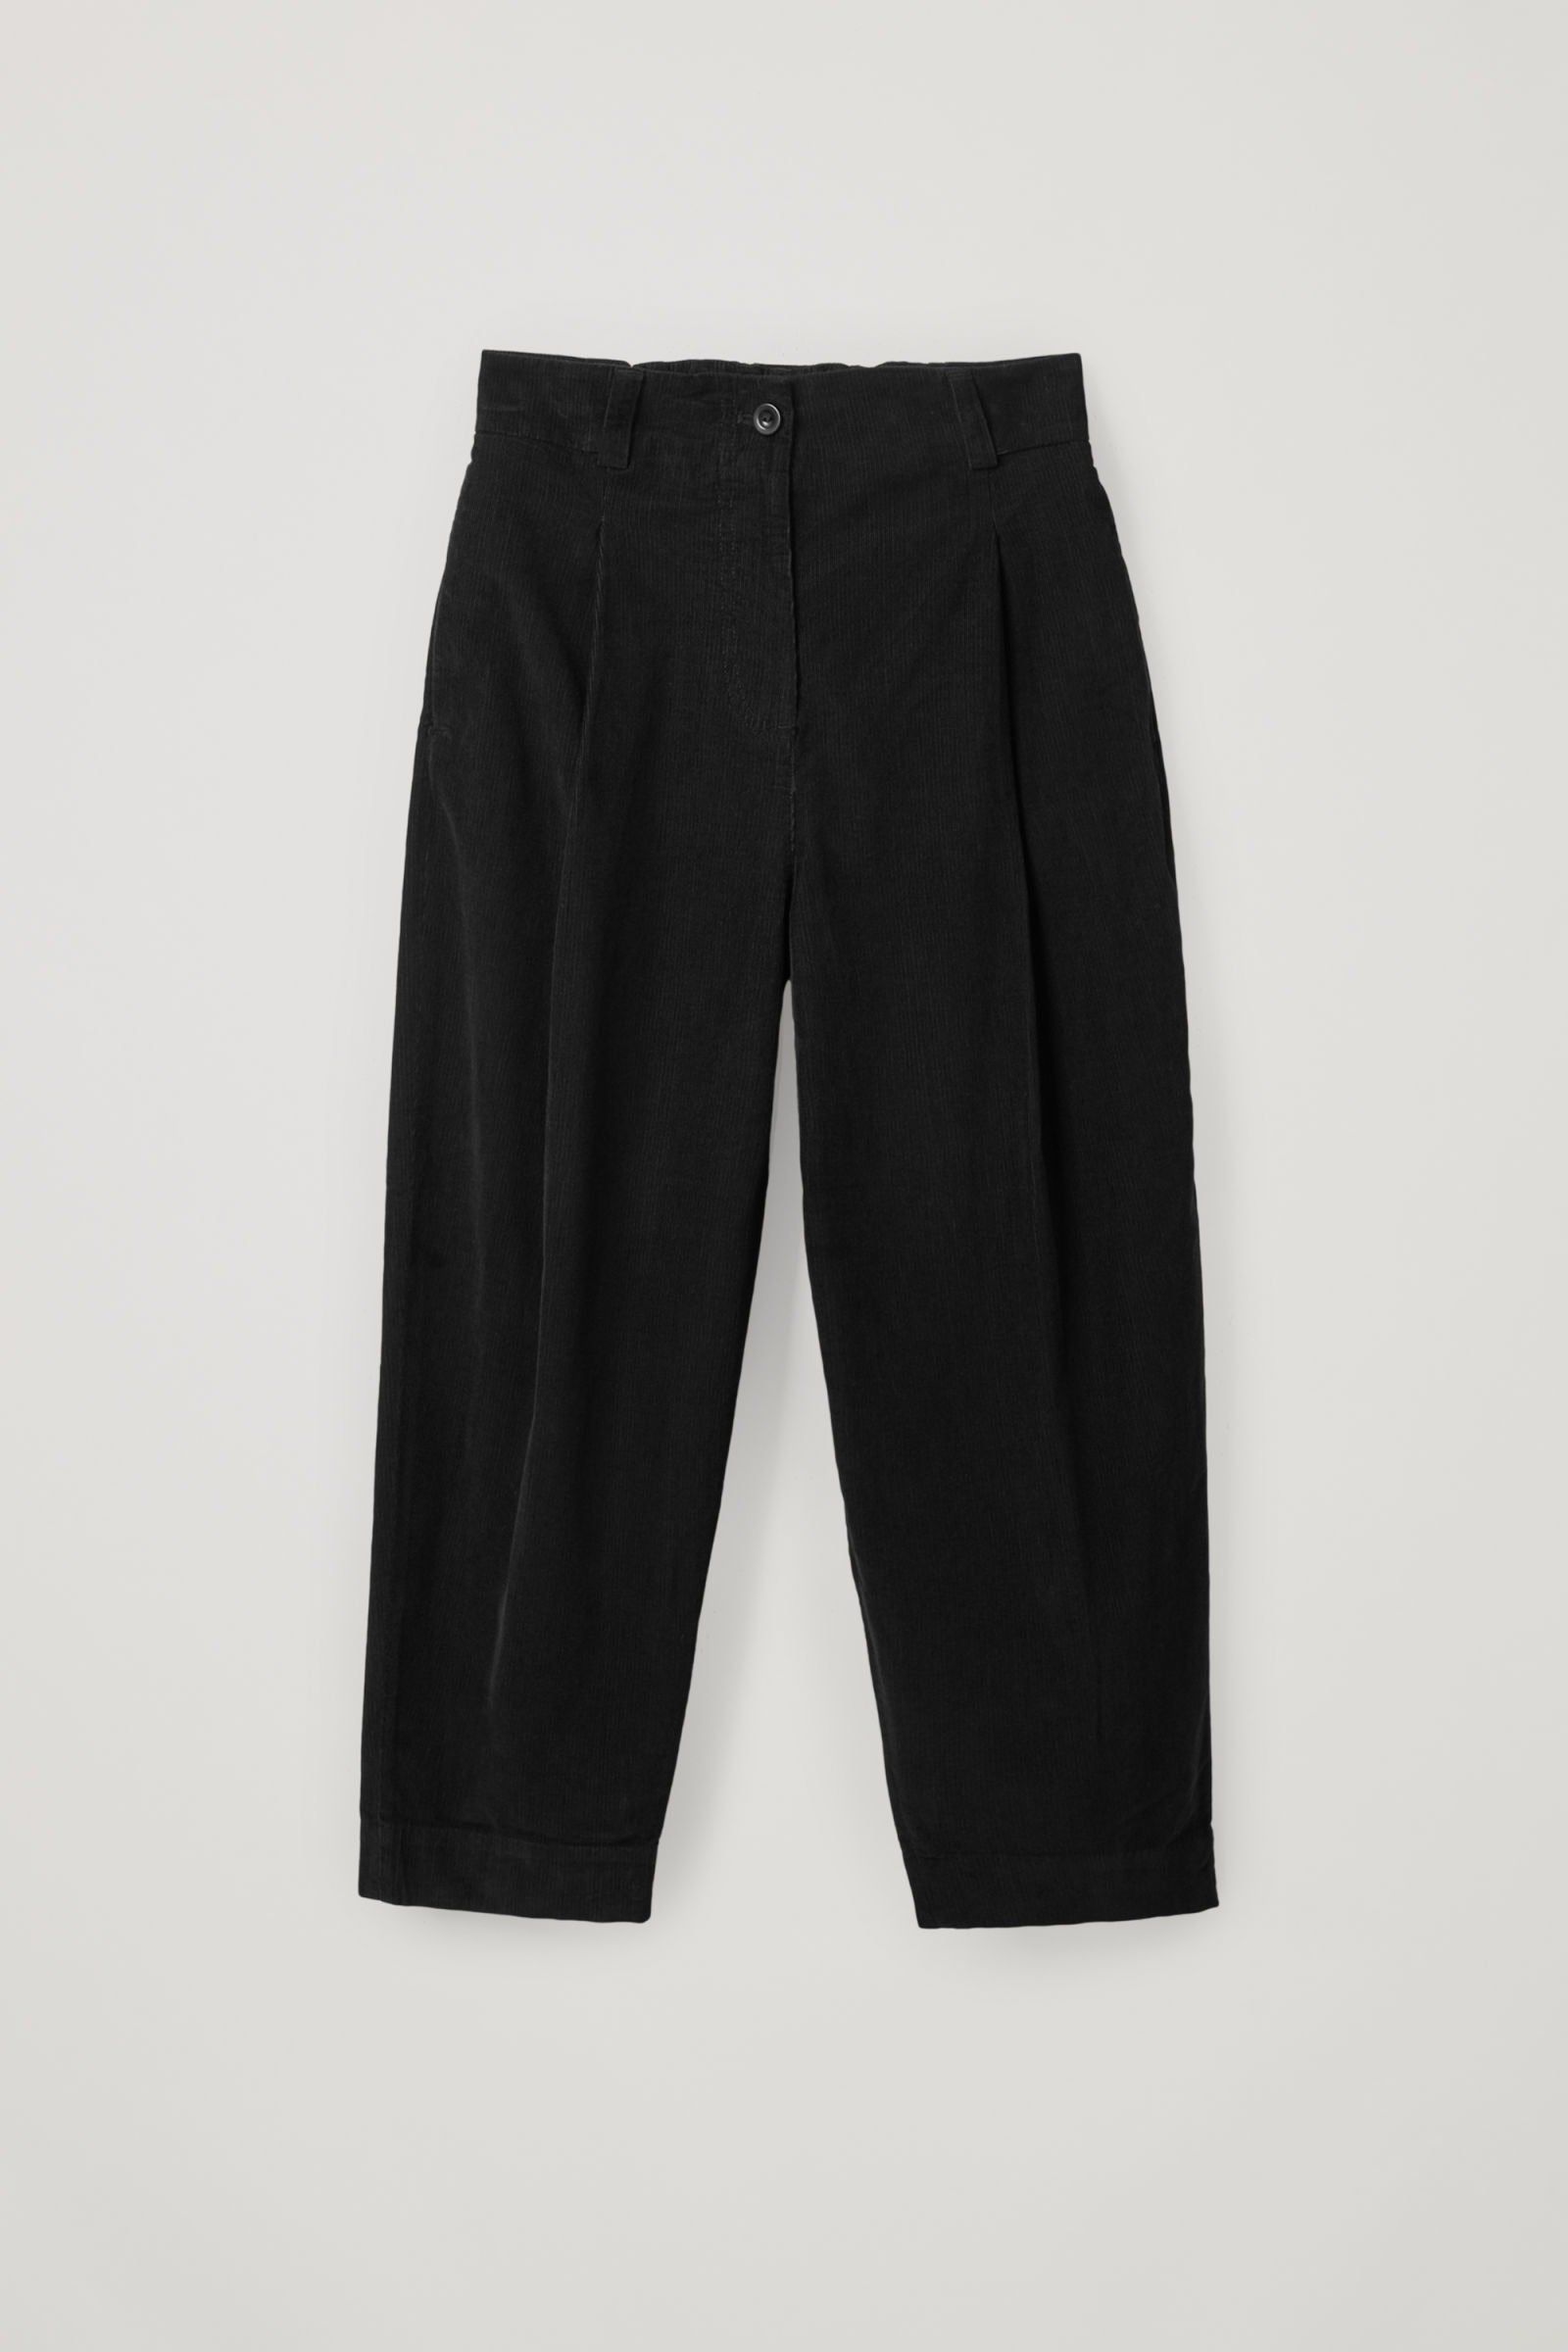 COS + Wide Leg Cord Trousers